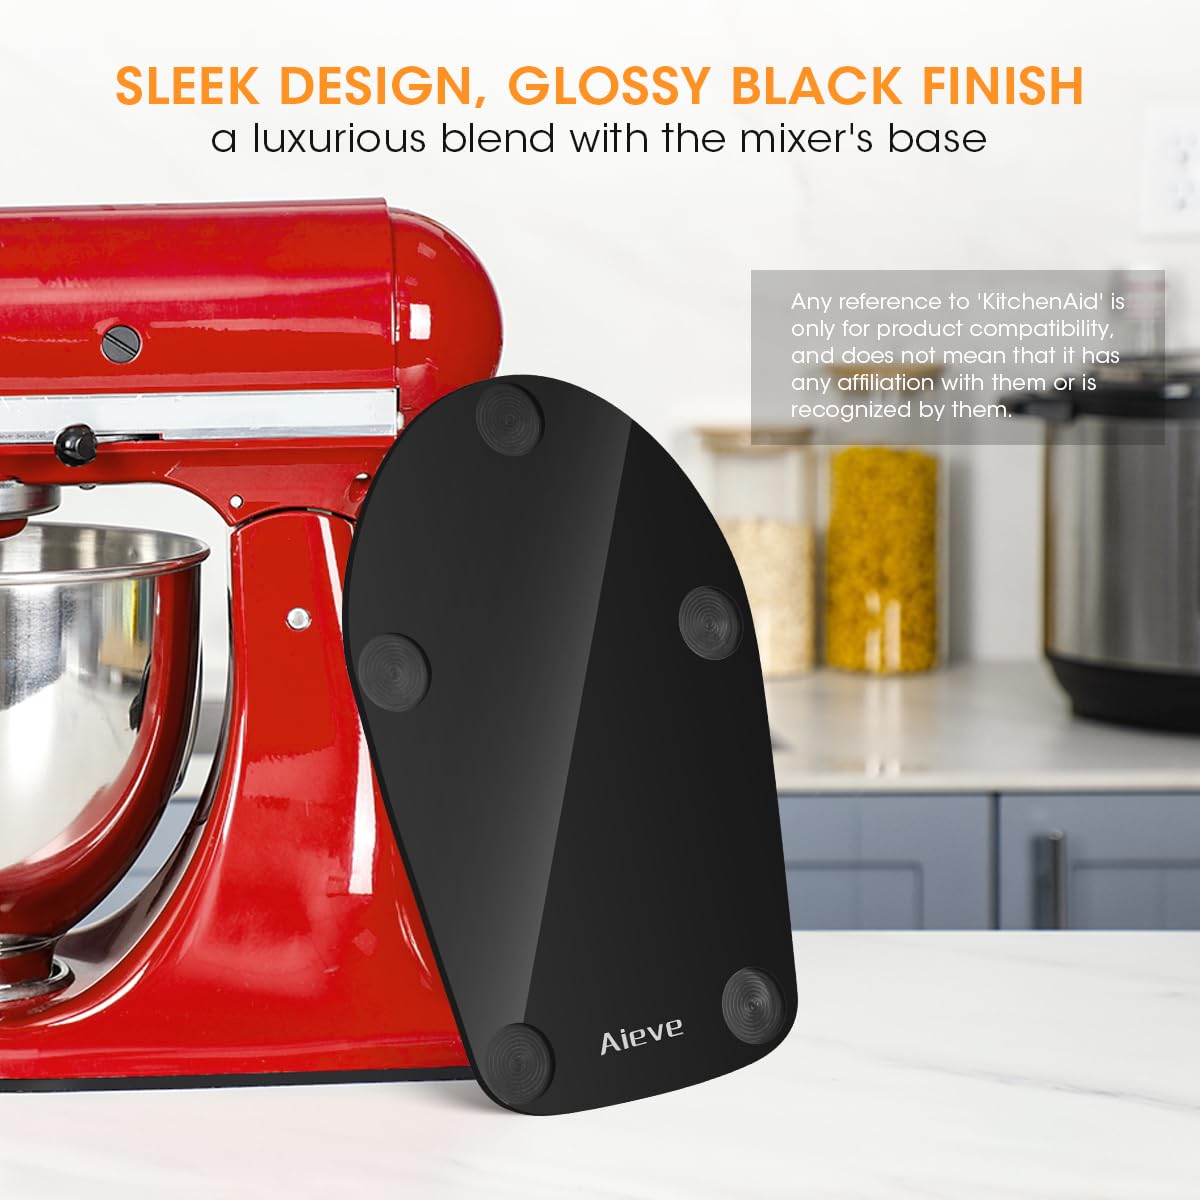 sleek design,glossy black finish,a luxurious blend with the mixer's base